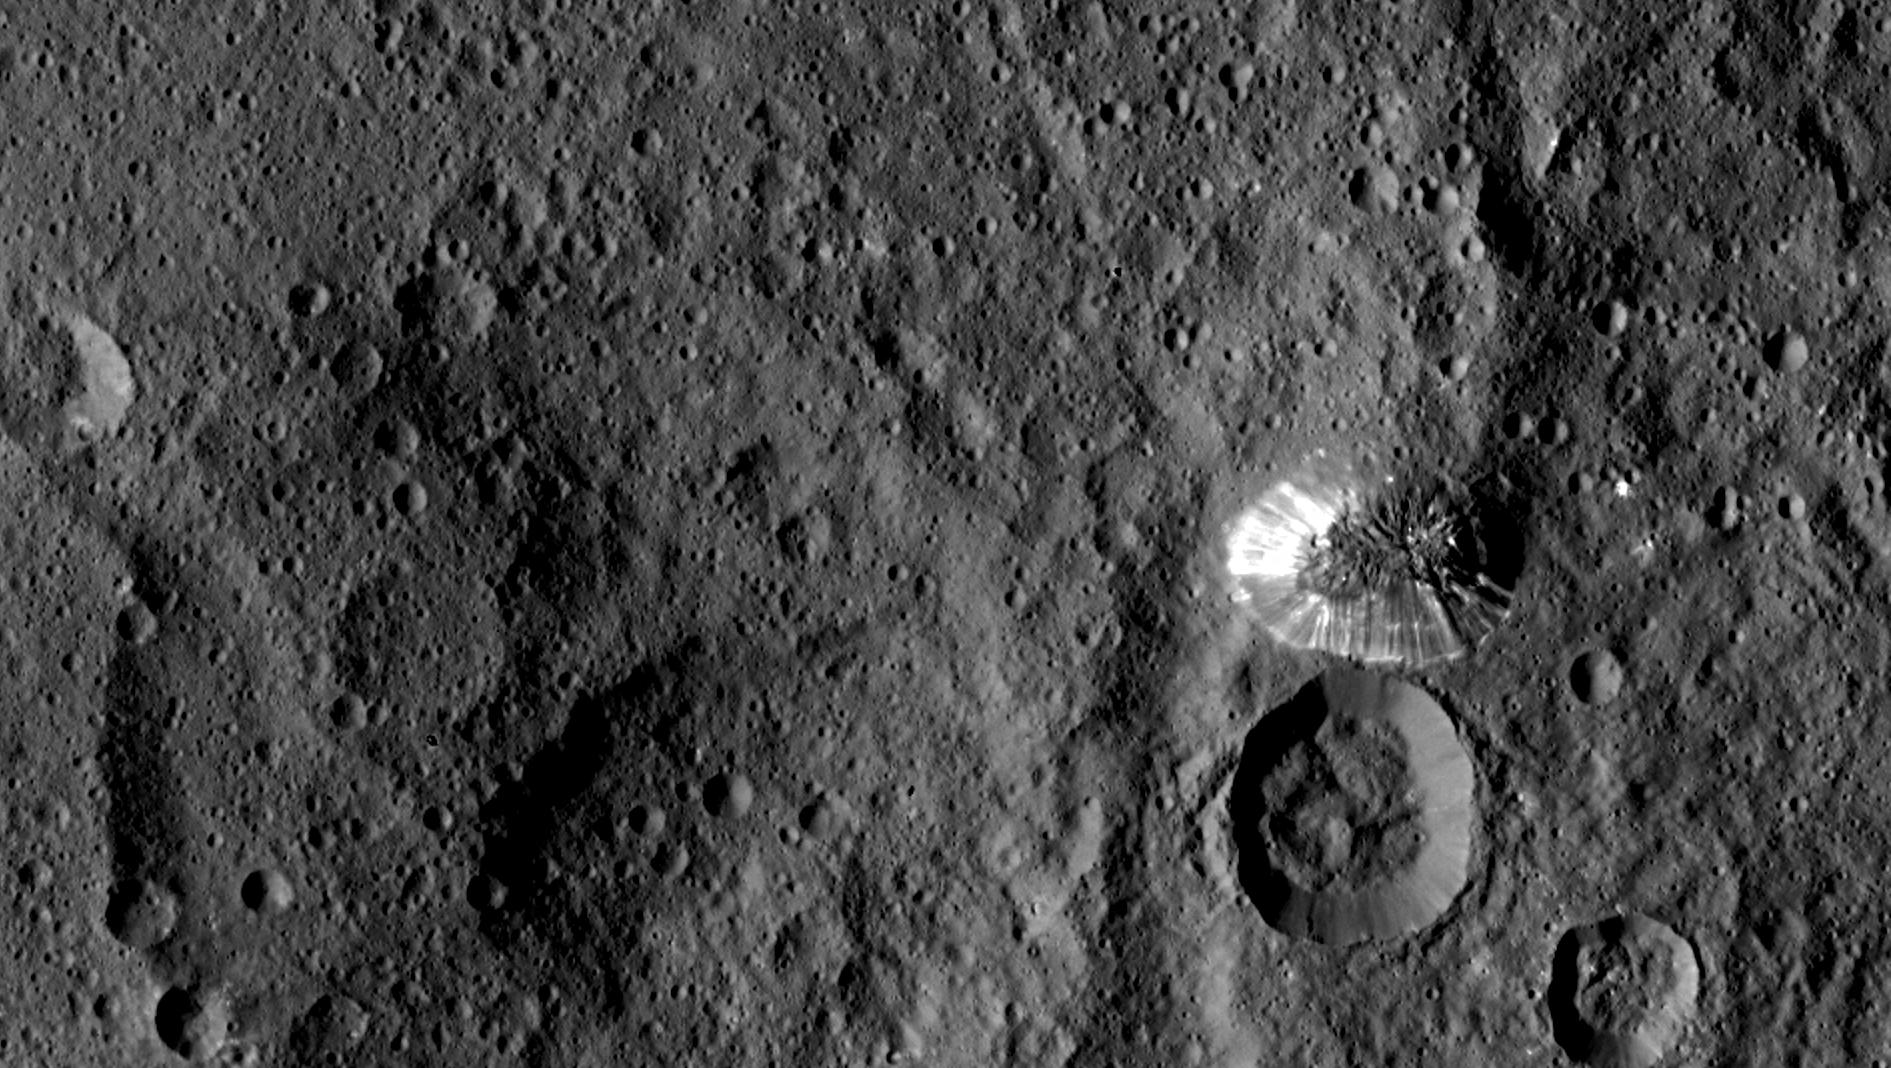 NASA's Dawn spacecraft spotted this tall, conical mountain on Ceres from a distance of 915 miles (1,470 kilometers).